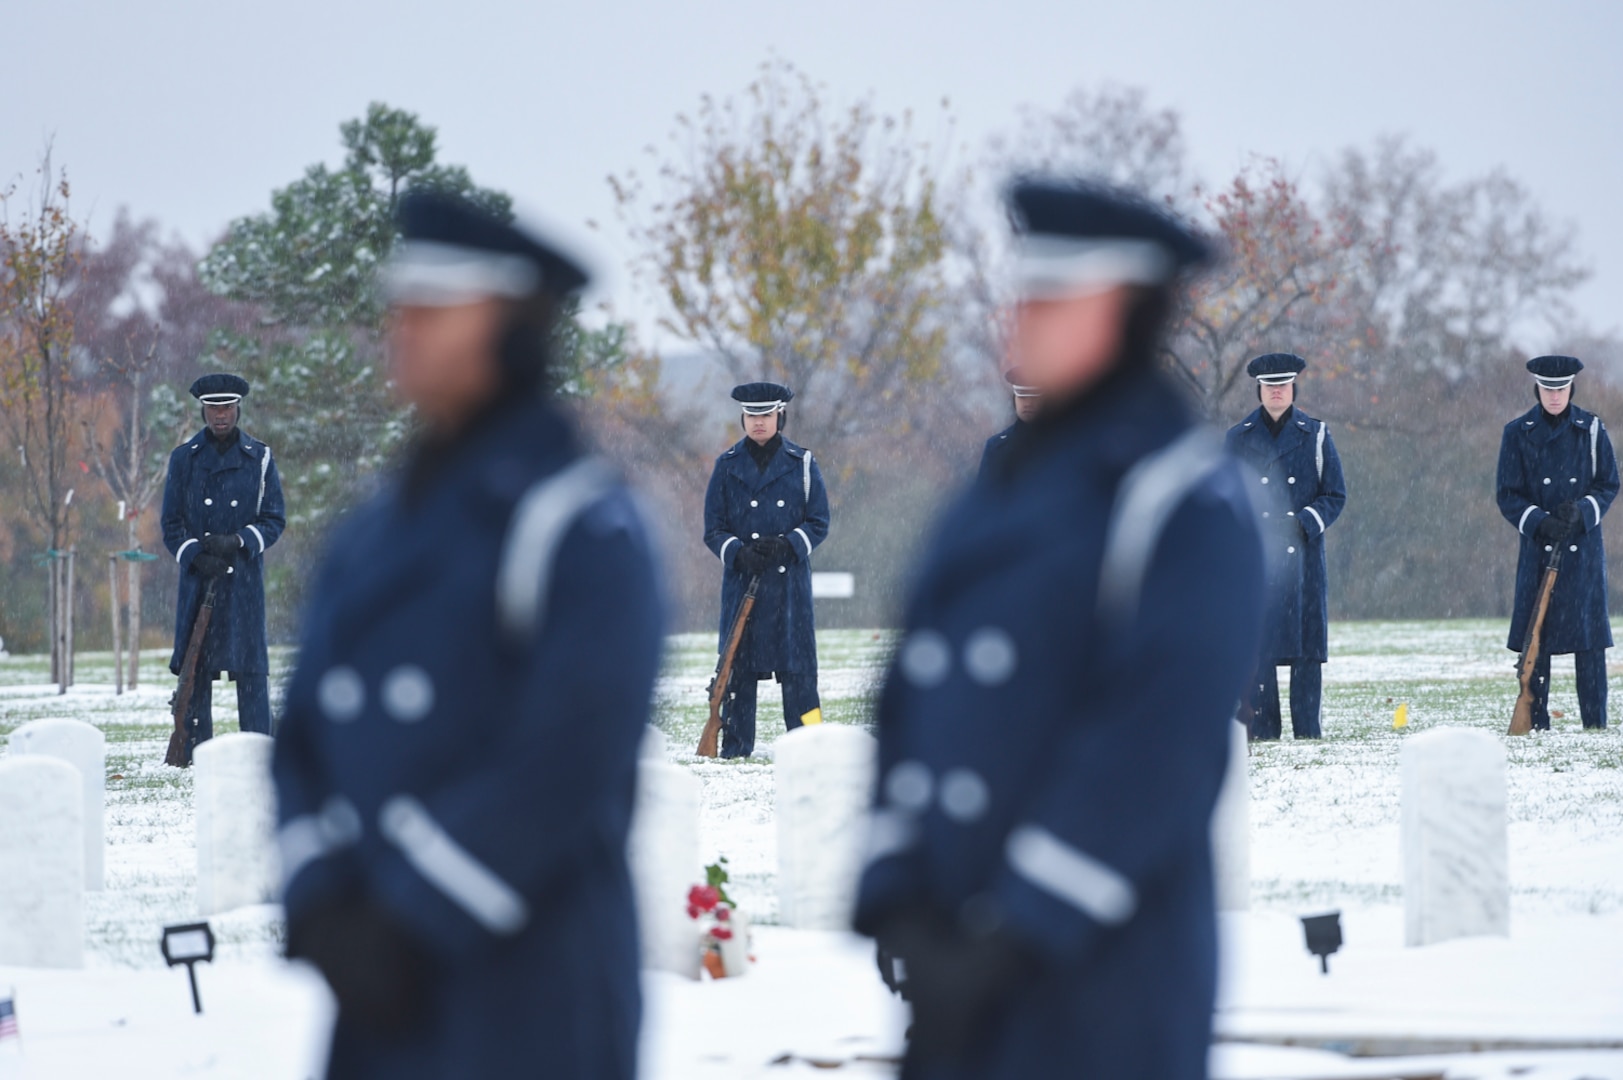 The U.S. Air Force firing party stand watch as Chief Master Sgt. Therese Henrion is laid to rest at Arlington National Cemetery, Nov. 15, 2018.